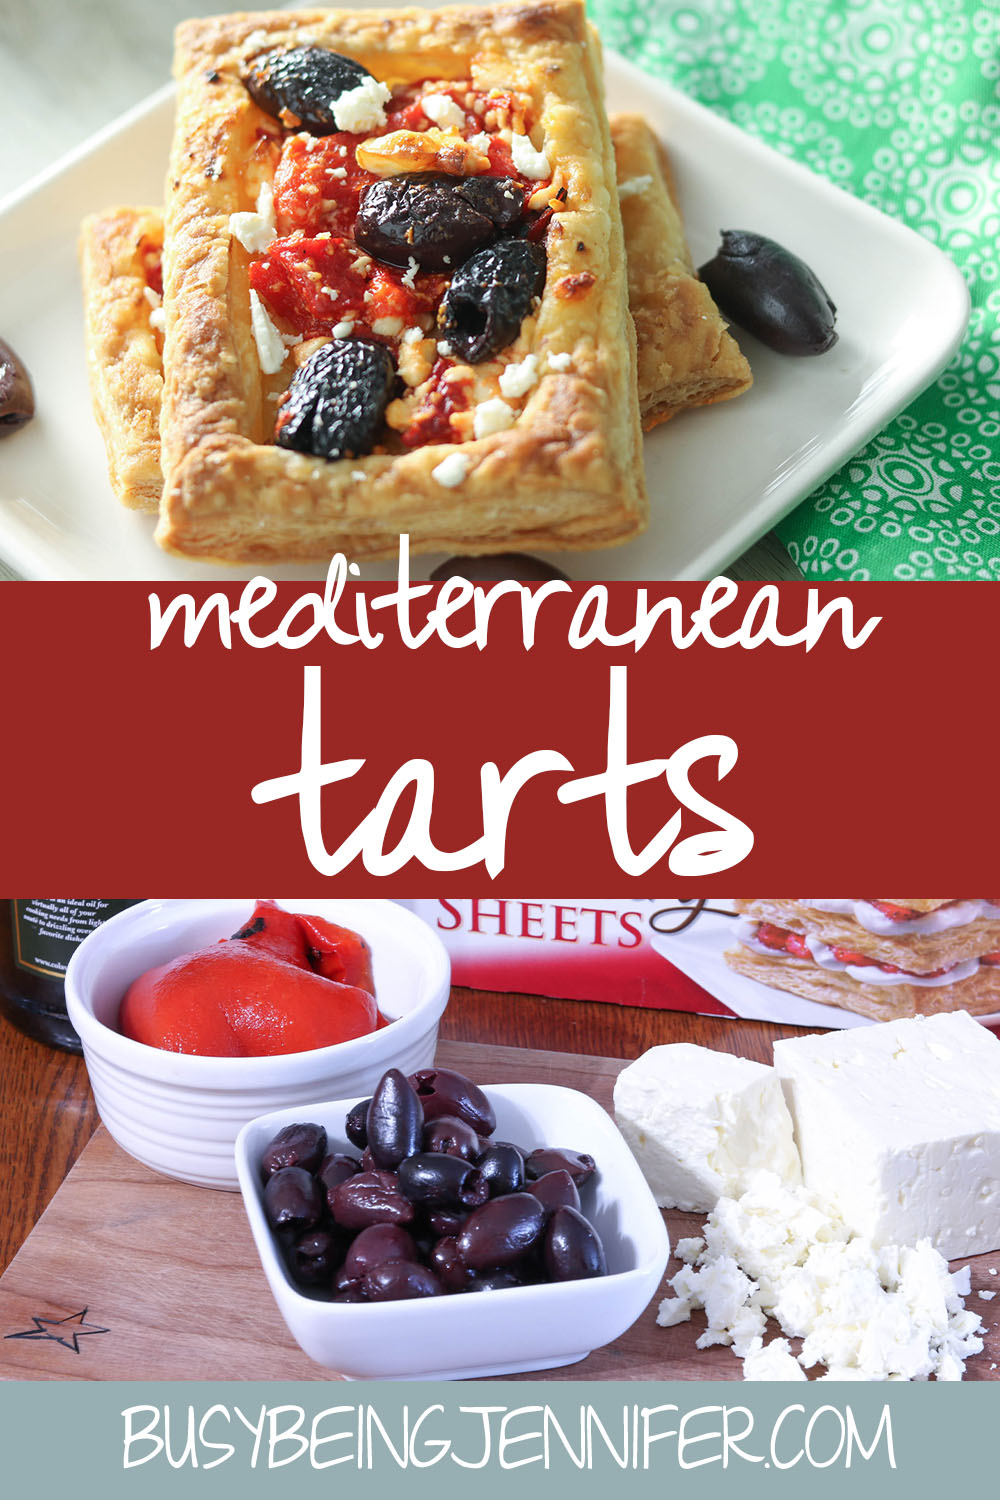 Soft, moist, spotted with familiar flavors of pizza, but in a much more lunch-sized portion for me than ordering out, these Mediterranean Red Pepper Tarts are coming up on one of my favorite lunchtime meals.